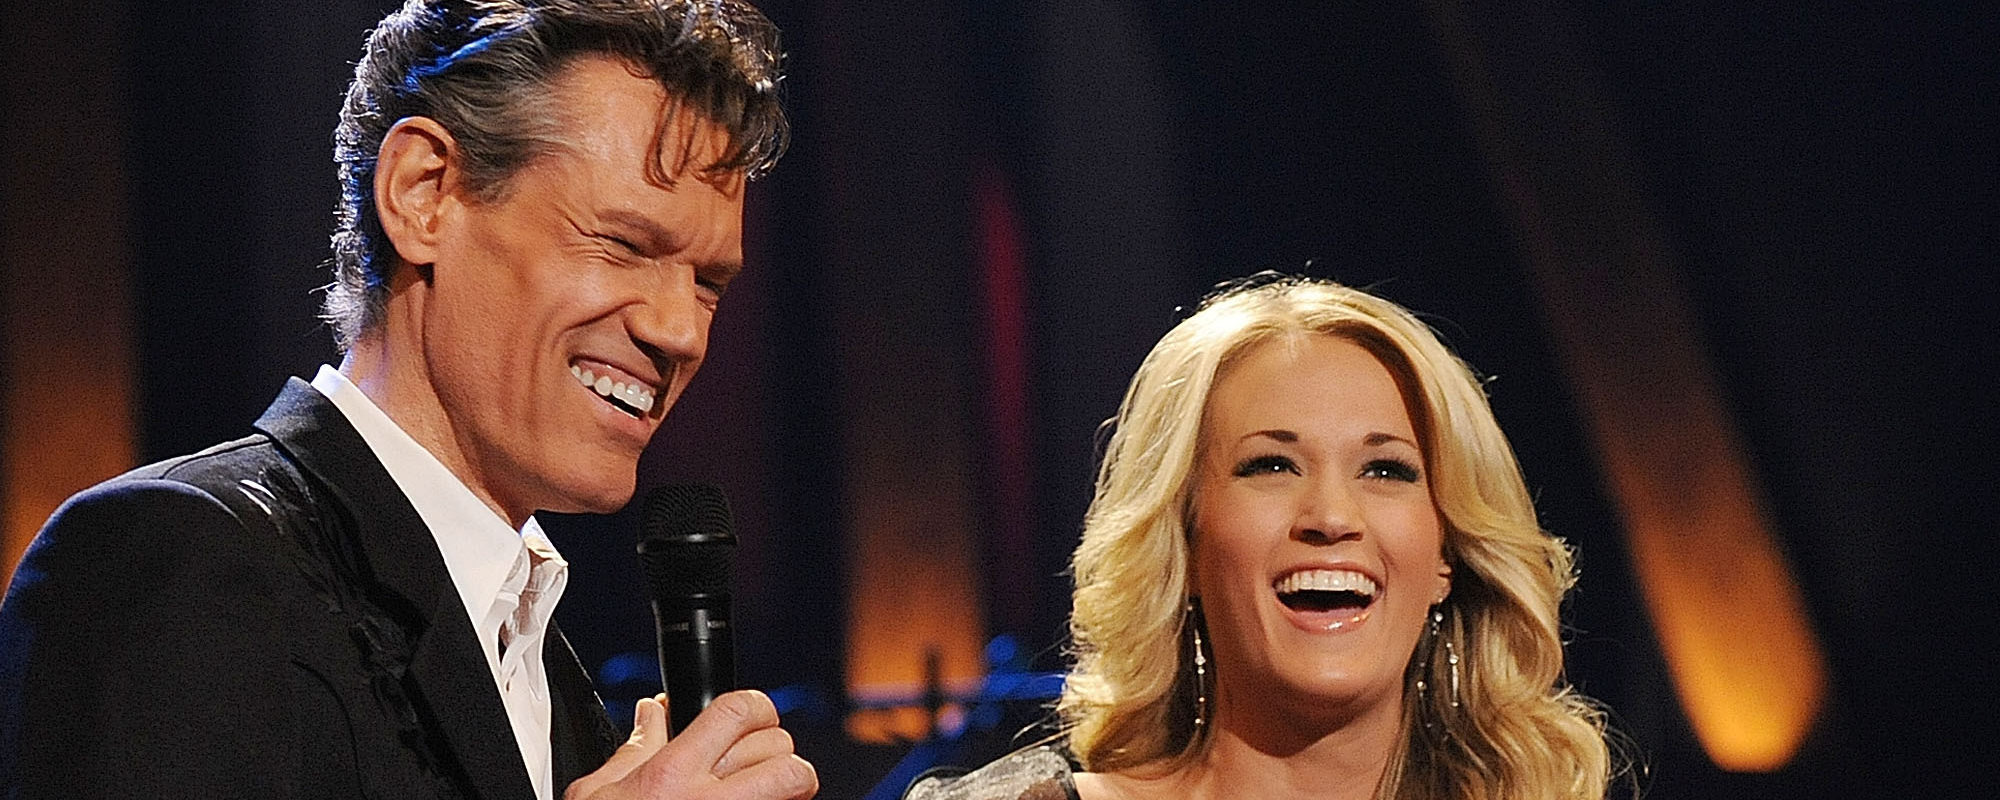 Carrie Underwood Shares Heartfelt Message About Randy Travis and His New Song “Where That Came From”